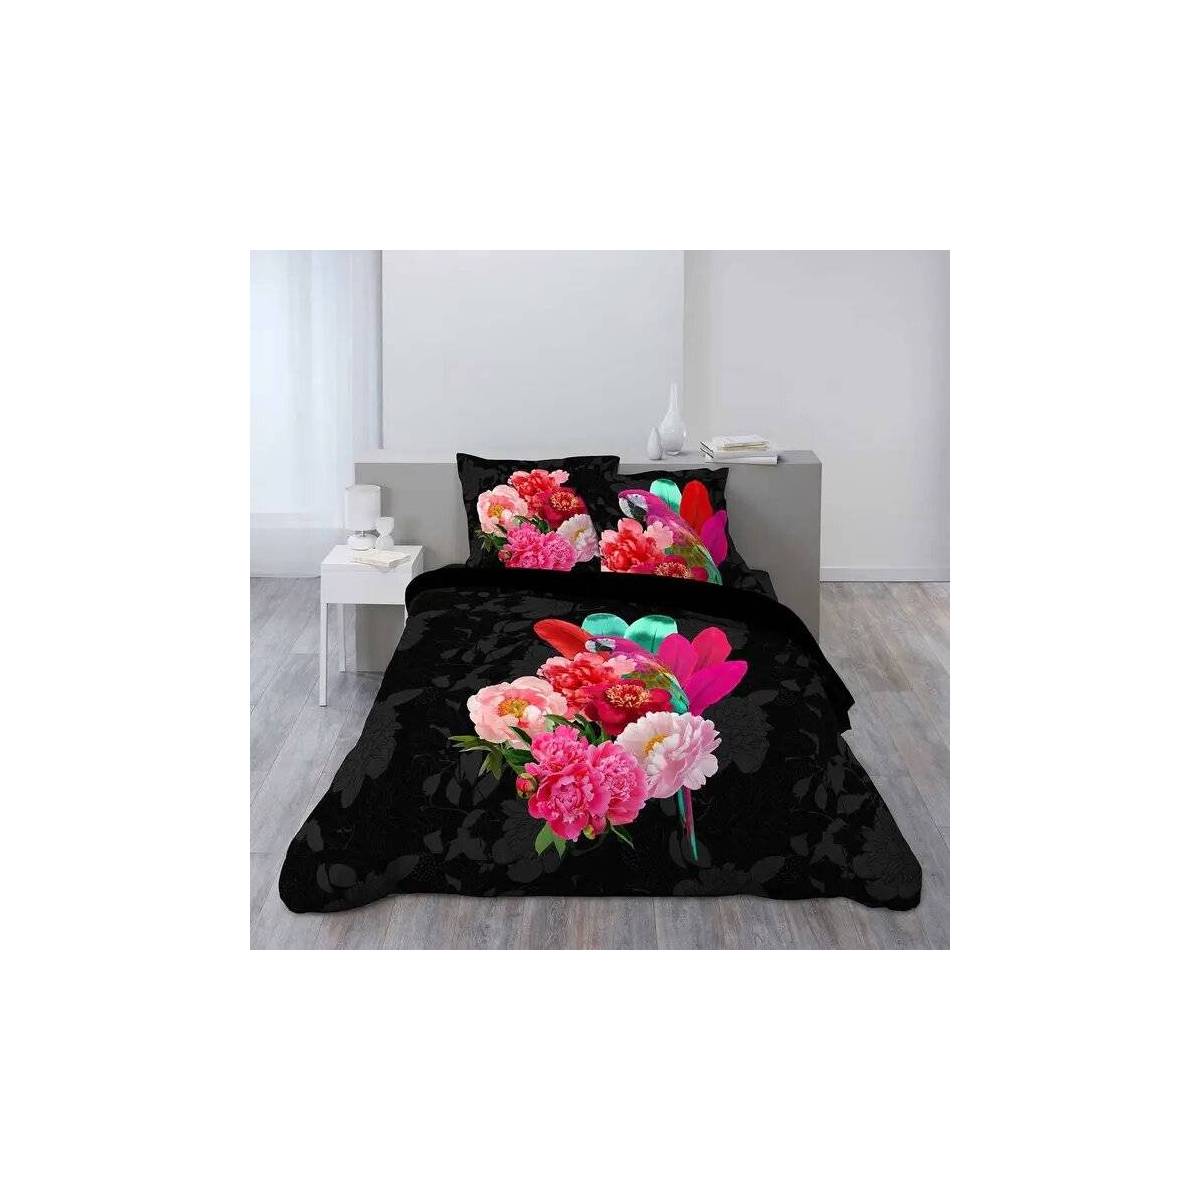 Duvet cover Flowers and Parrot Perro Pink 240 x 220 cm black